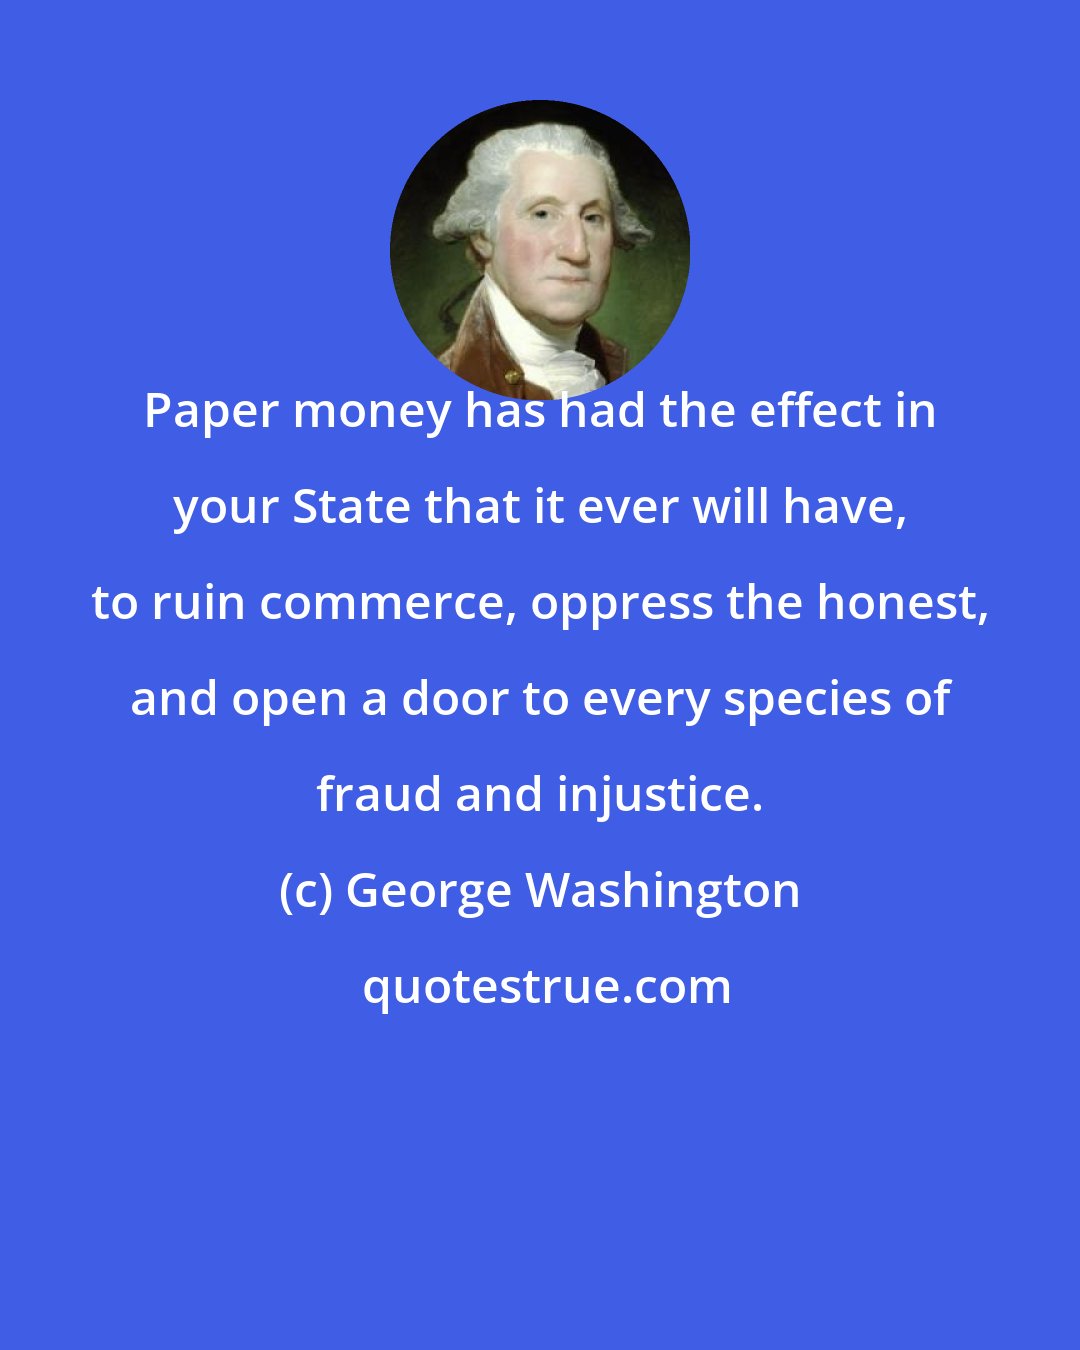 George Washington: Paper money has had the effect in your State that it ever will have, to ruin commerce, oppress the honest, and open a door to every species of fraud and injustice.